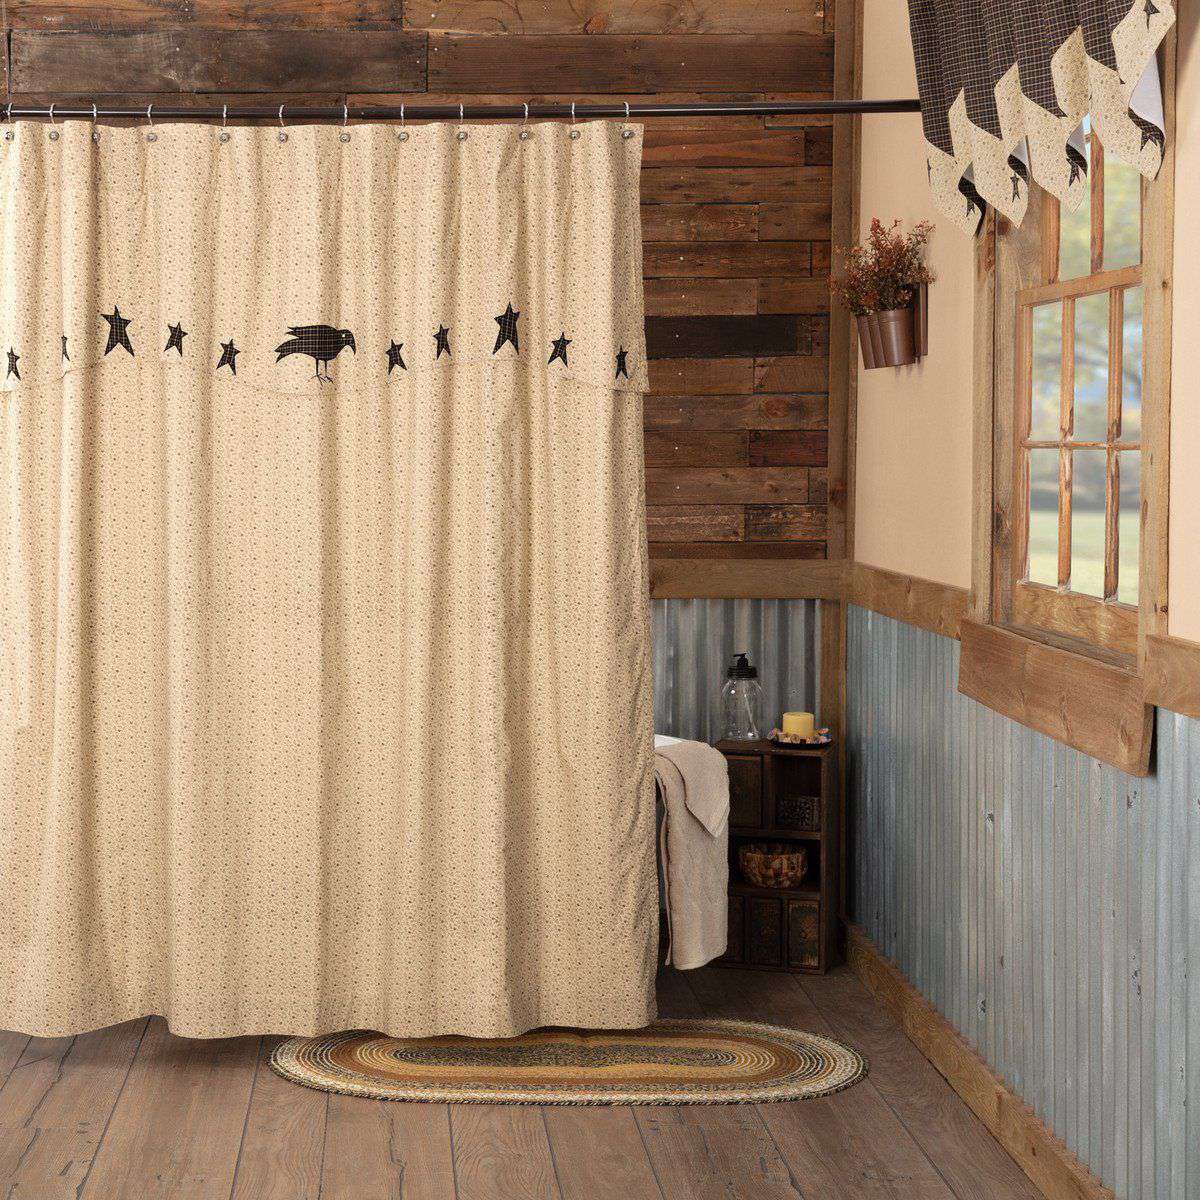 Kettle Grove Shower Curtain with Attached Applique Crow and Star Valance 72"x72" curtain VHC Brands 